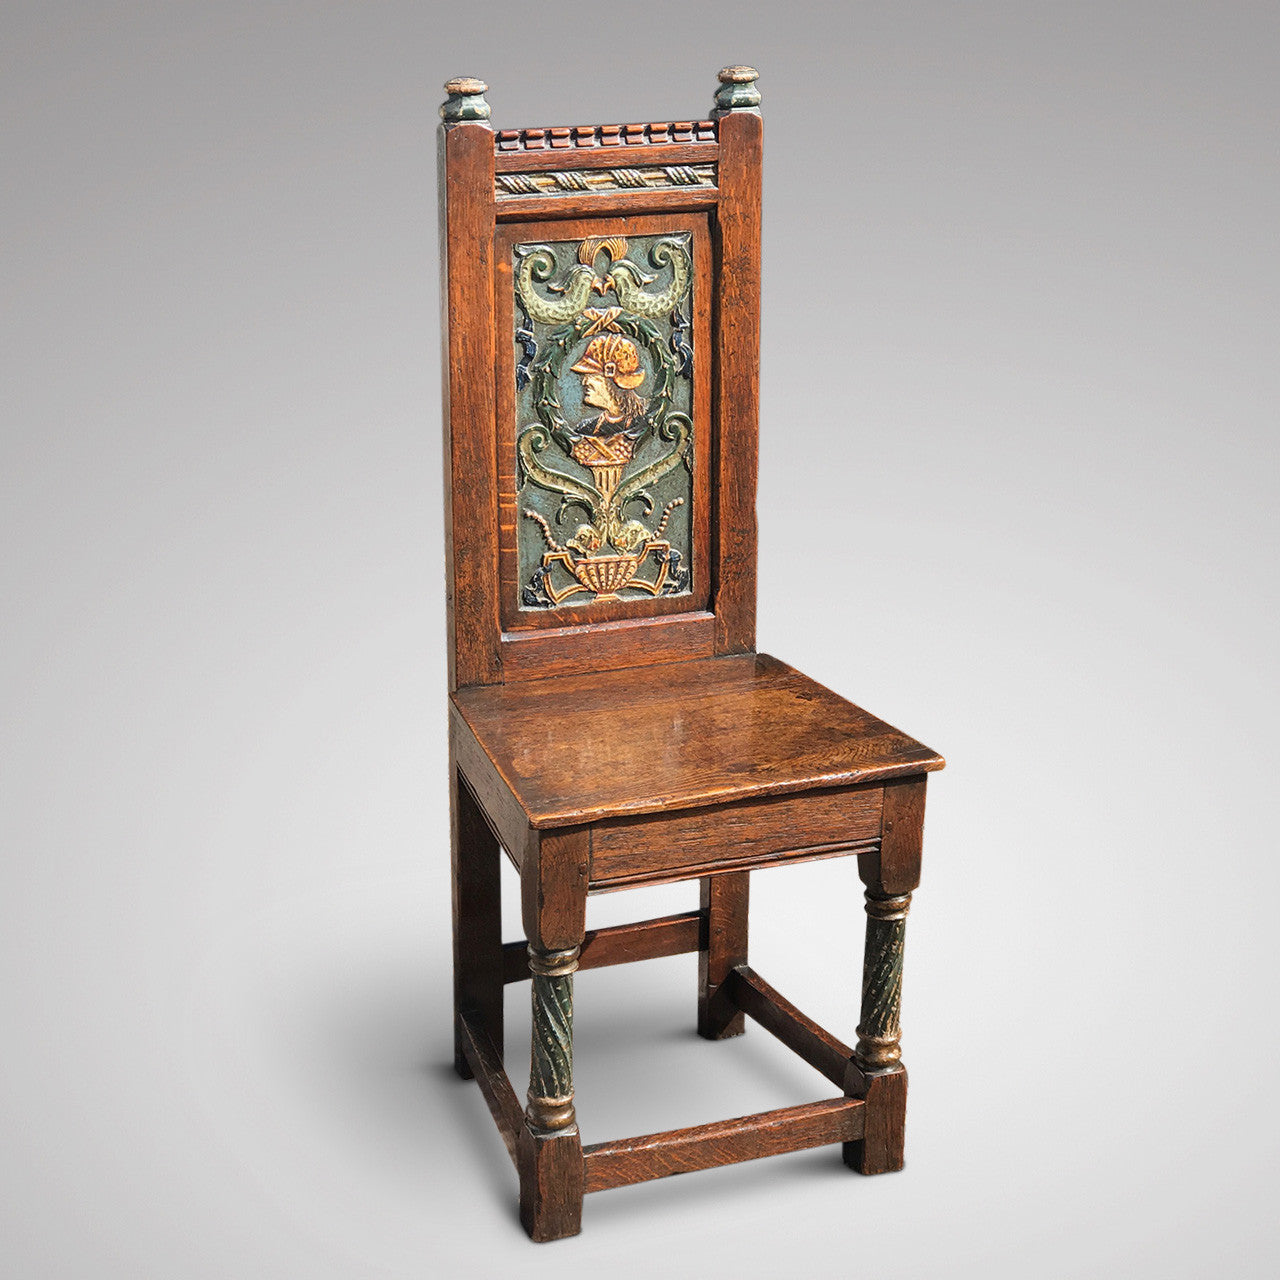 18th Century Oak Side Chair with Painted Decoration – Hobson May 